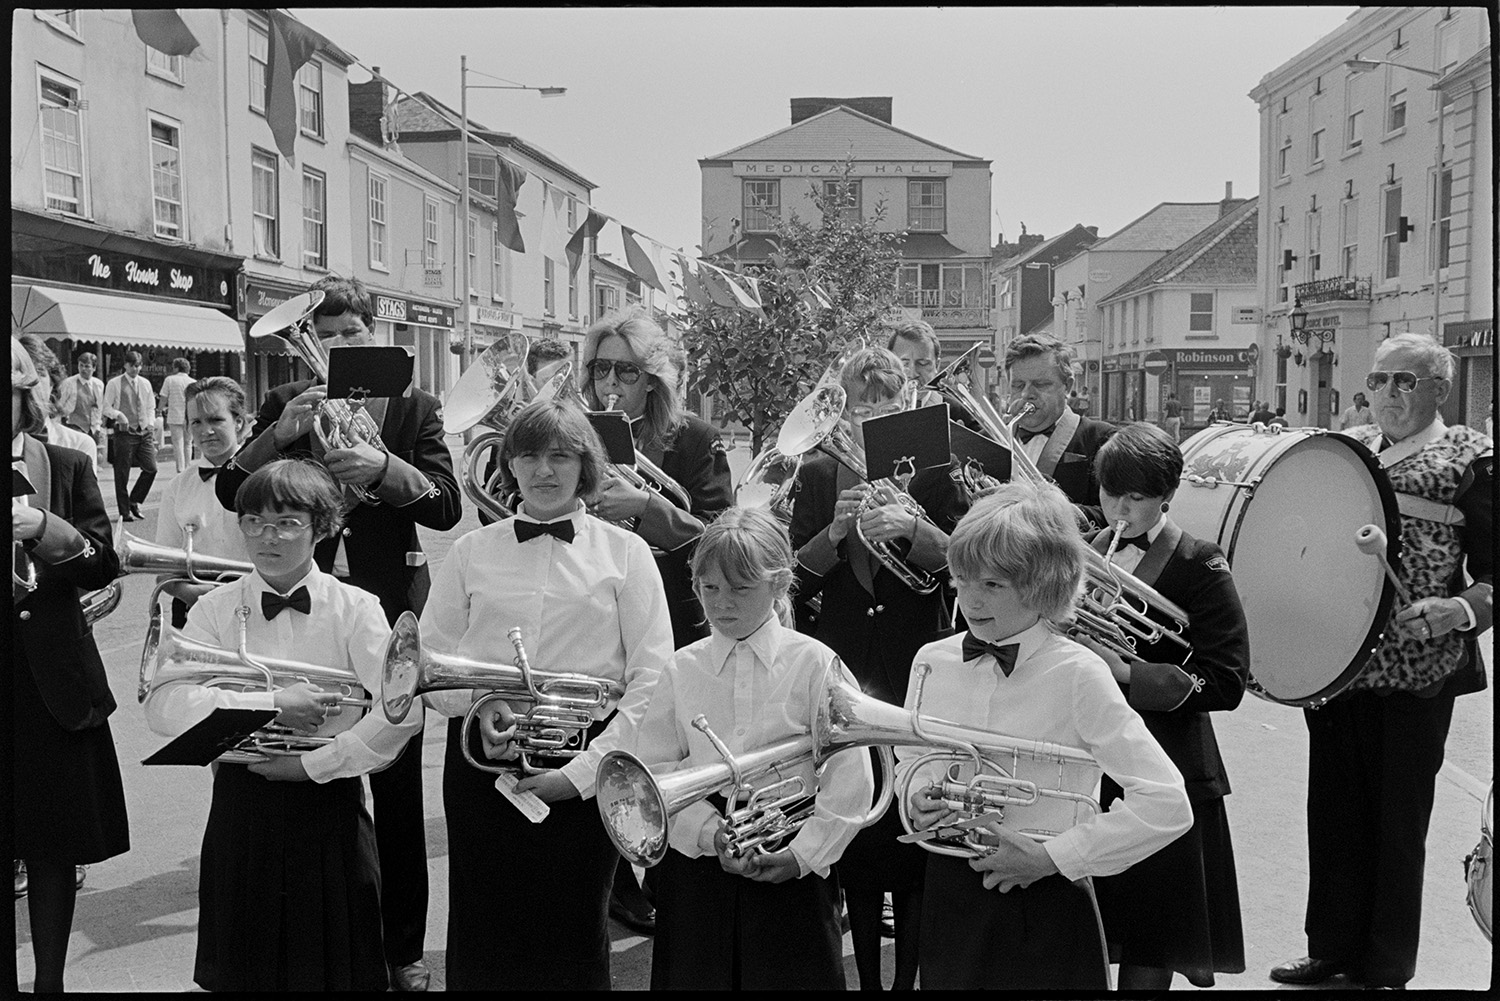 Band playing in village.
[The South Molton Town Band playing in the square in South Molton. They are in uniform and playing various brass instruments along with a bass drum. Bunting is attached to a small tree behind the band, and a number of shops and town houses are in the background.]